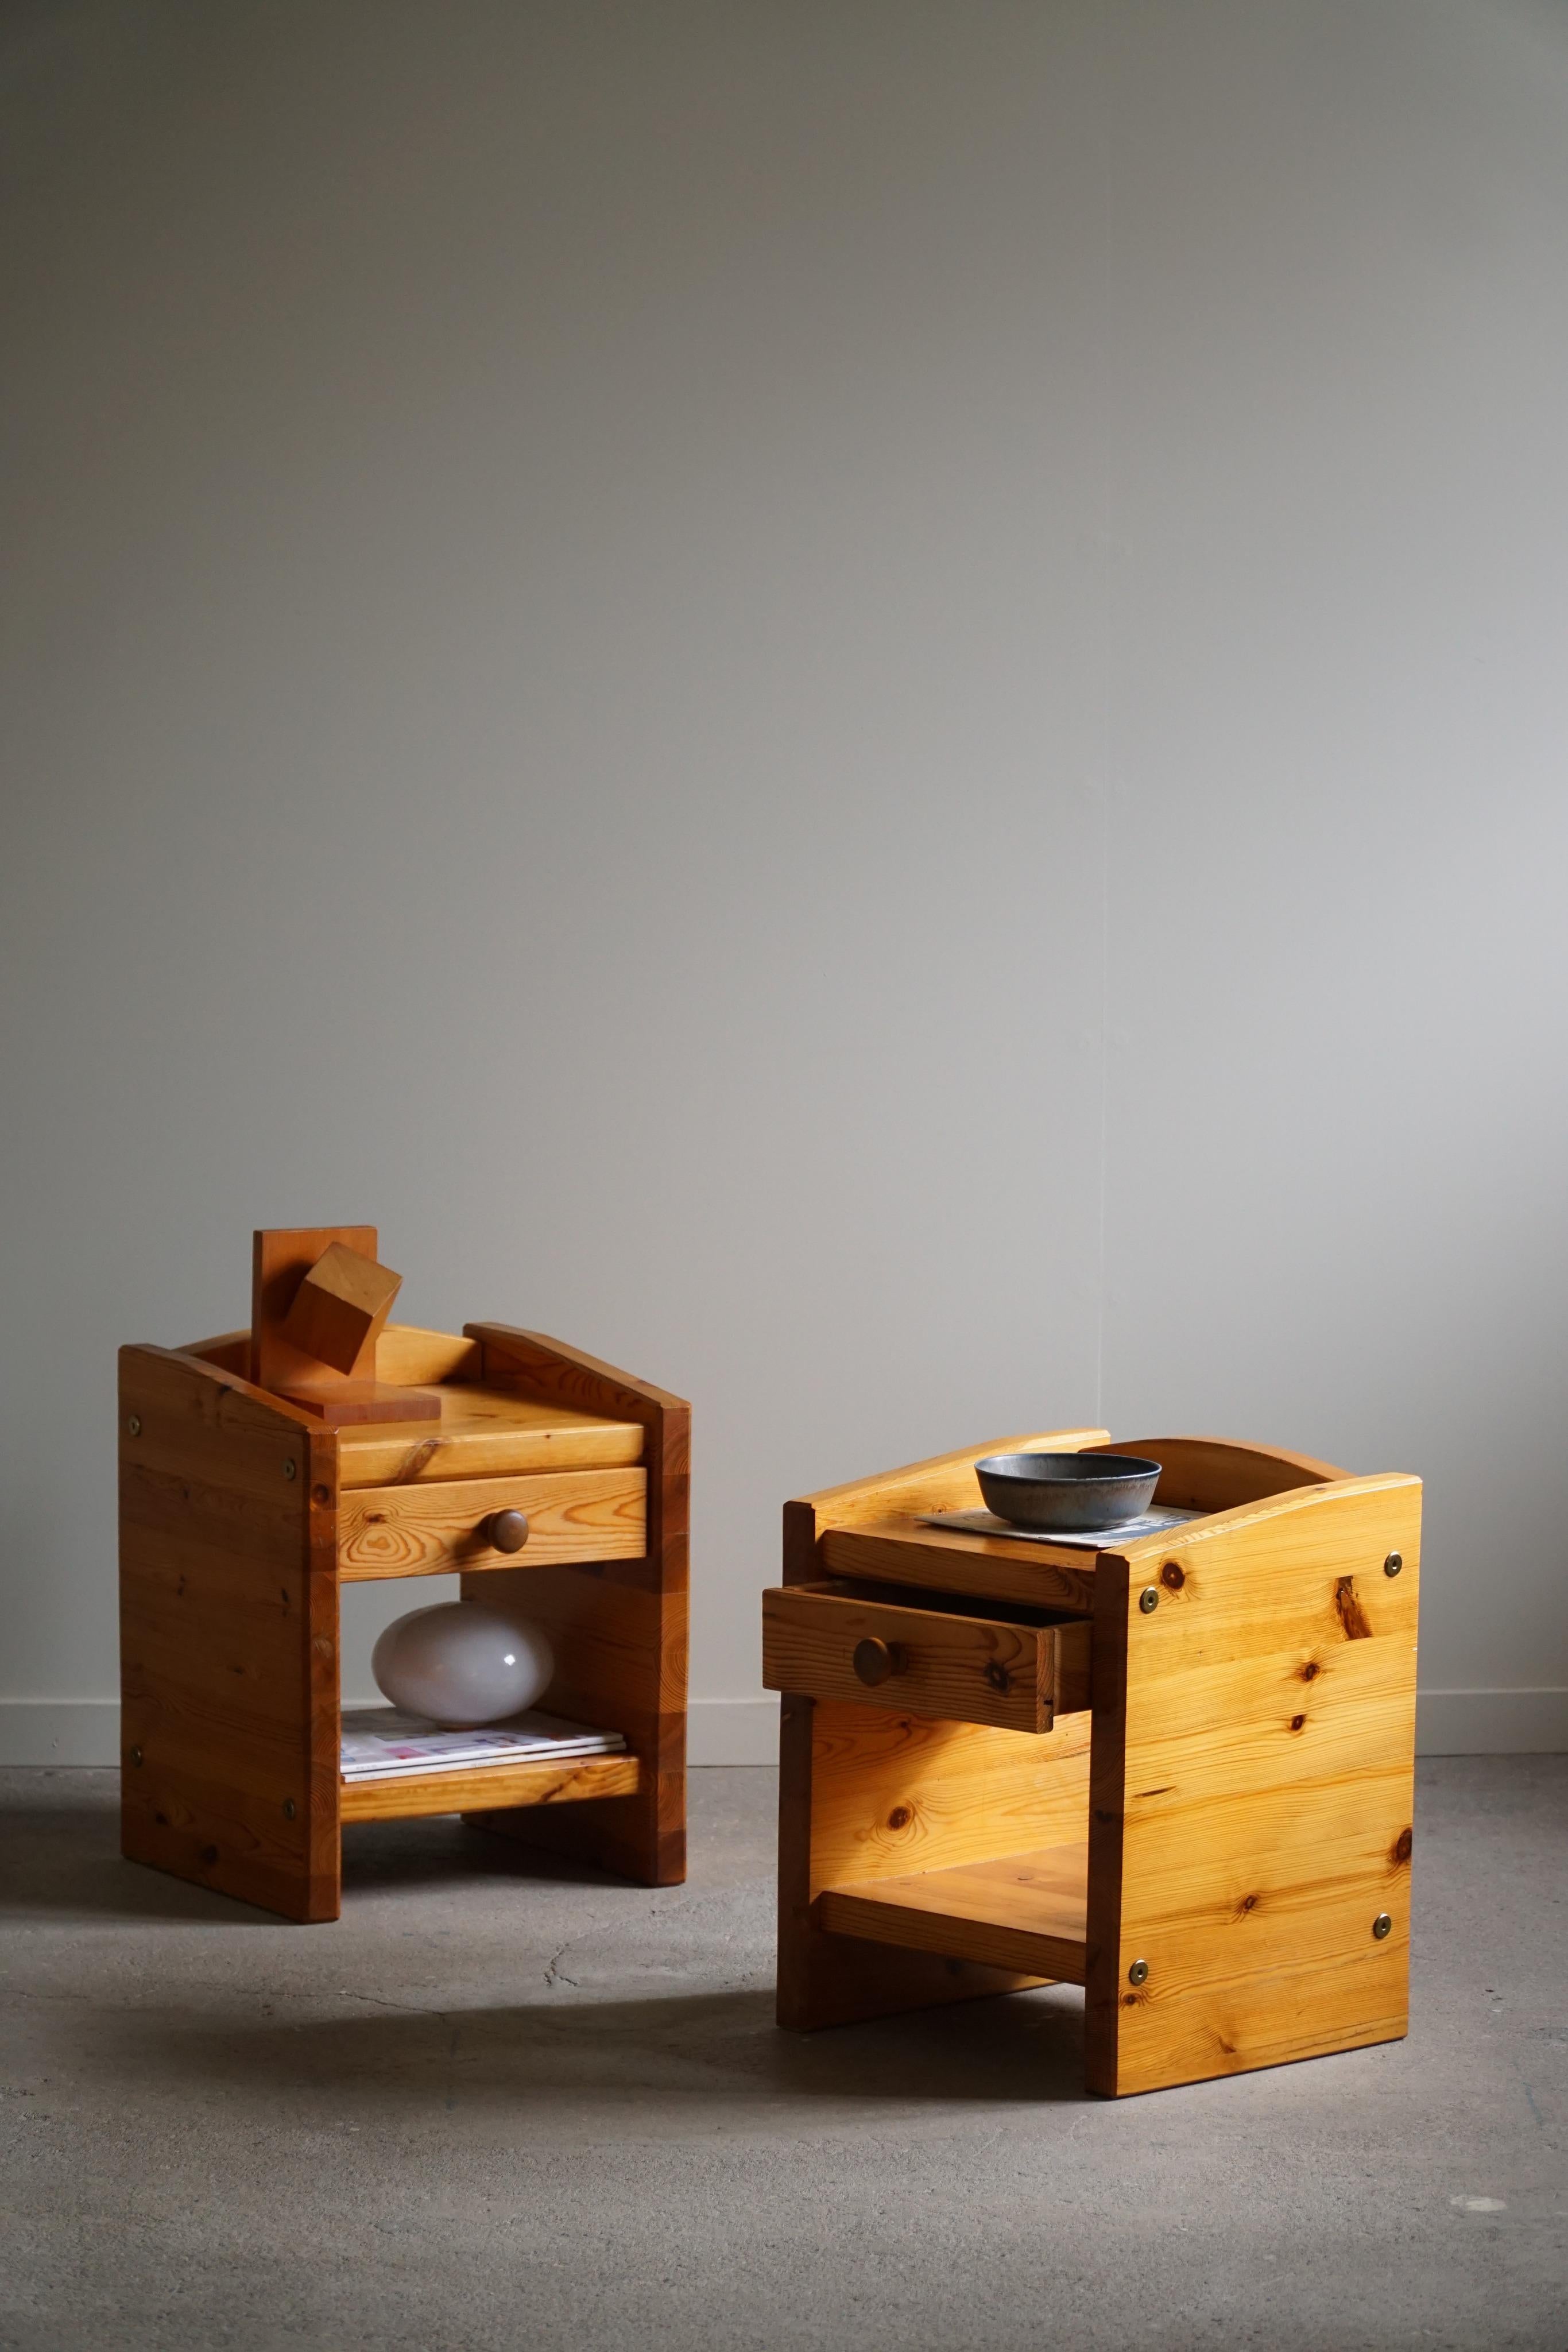 A classic pair of Scandinavian night stands / side tables in solid pine with a drawer, made in Denmark in ca 1970s by an unknown cabinetmaker.

The night stands are nicely patinated with some traces of wear.

A fine brutalist object with a warm